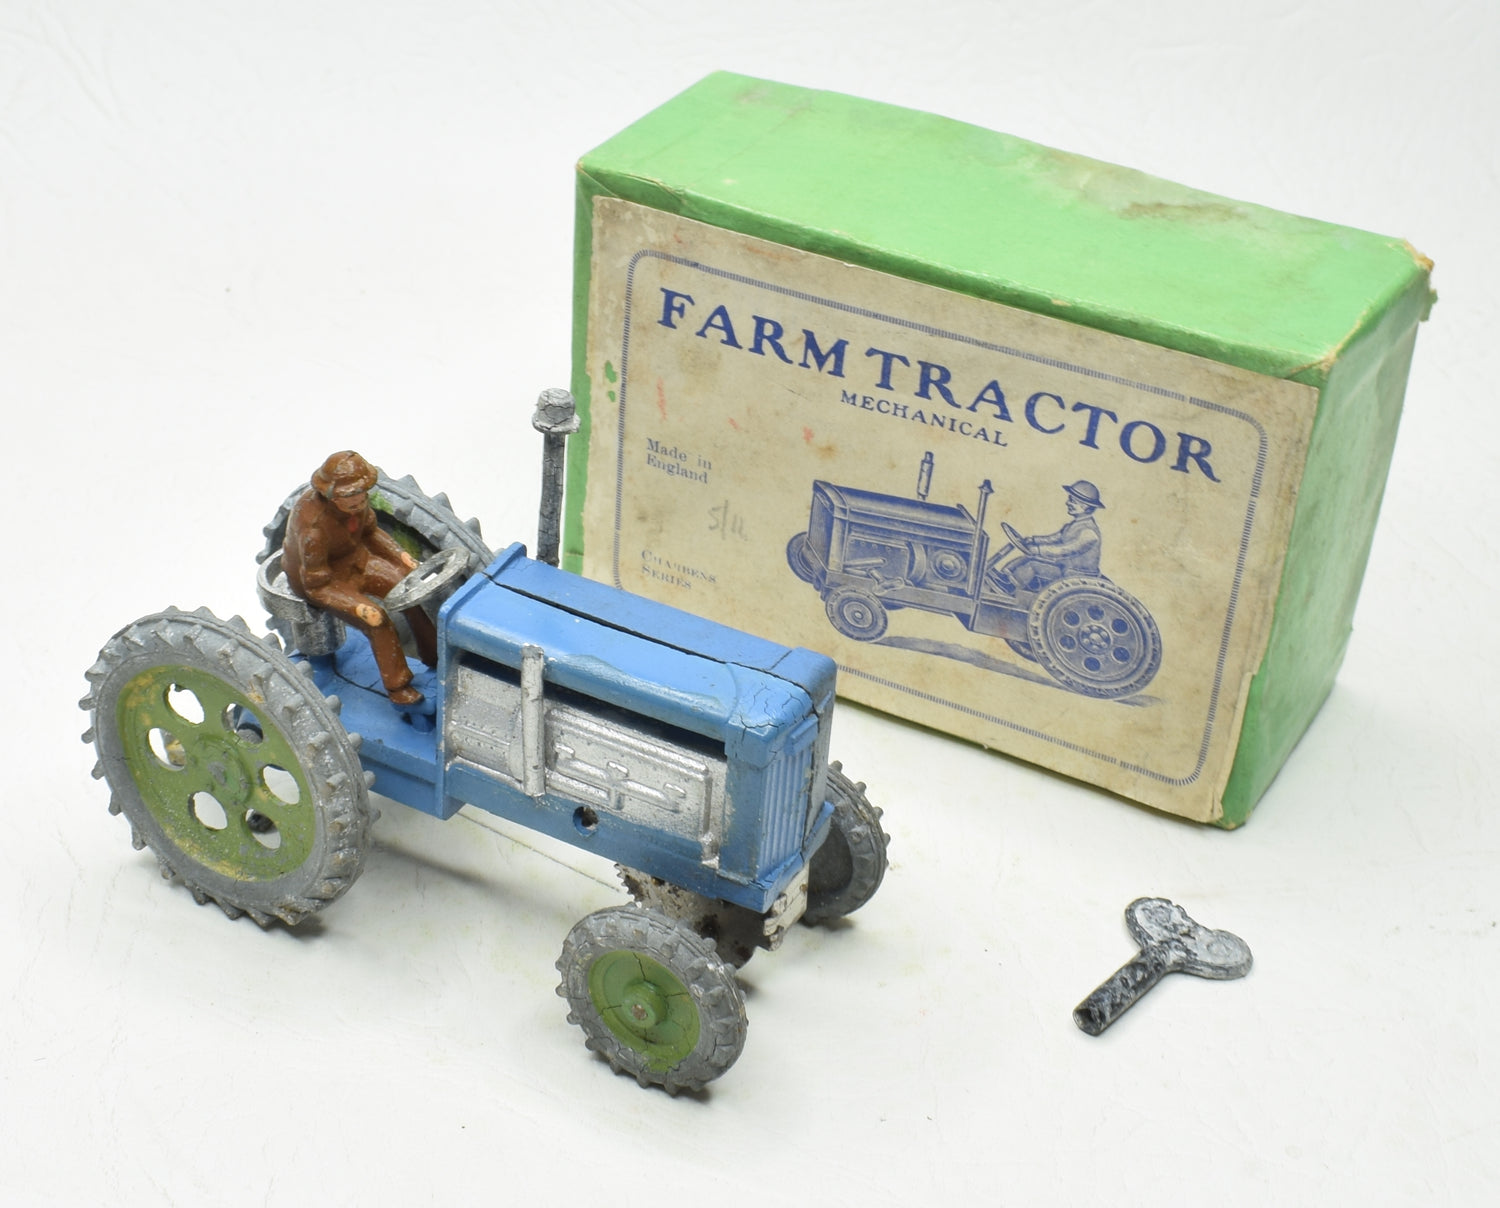 Charben's Mechanical Farm Tractor Near Mint/Boxed (Incredibly rare blue version March 1951)